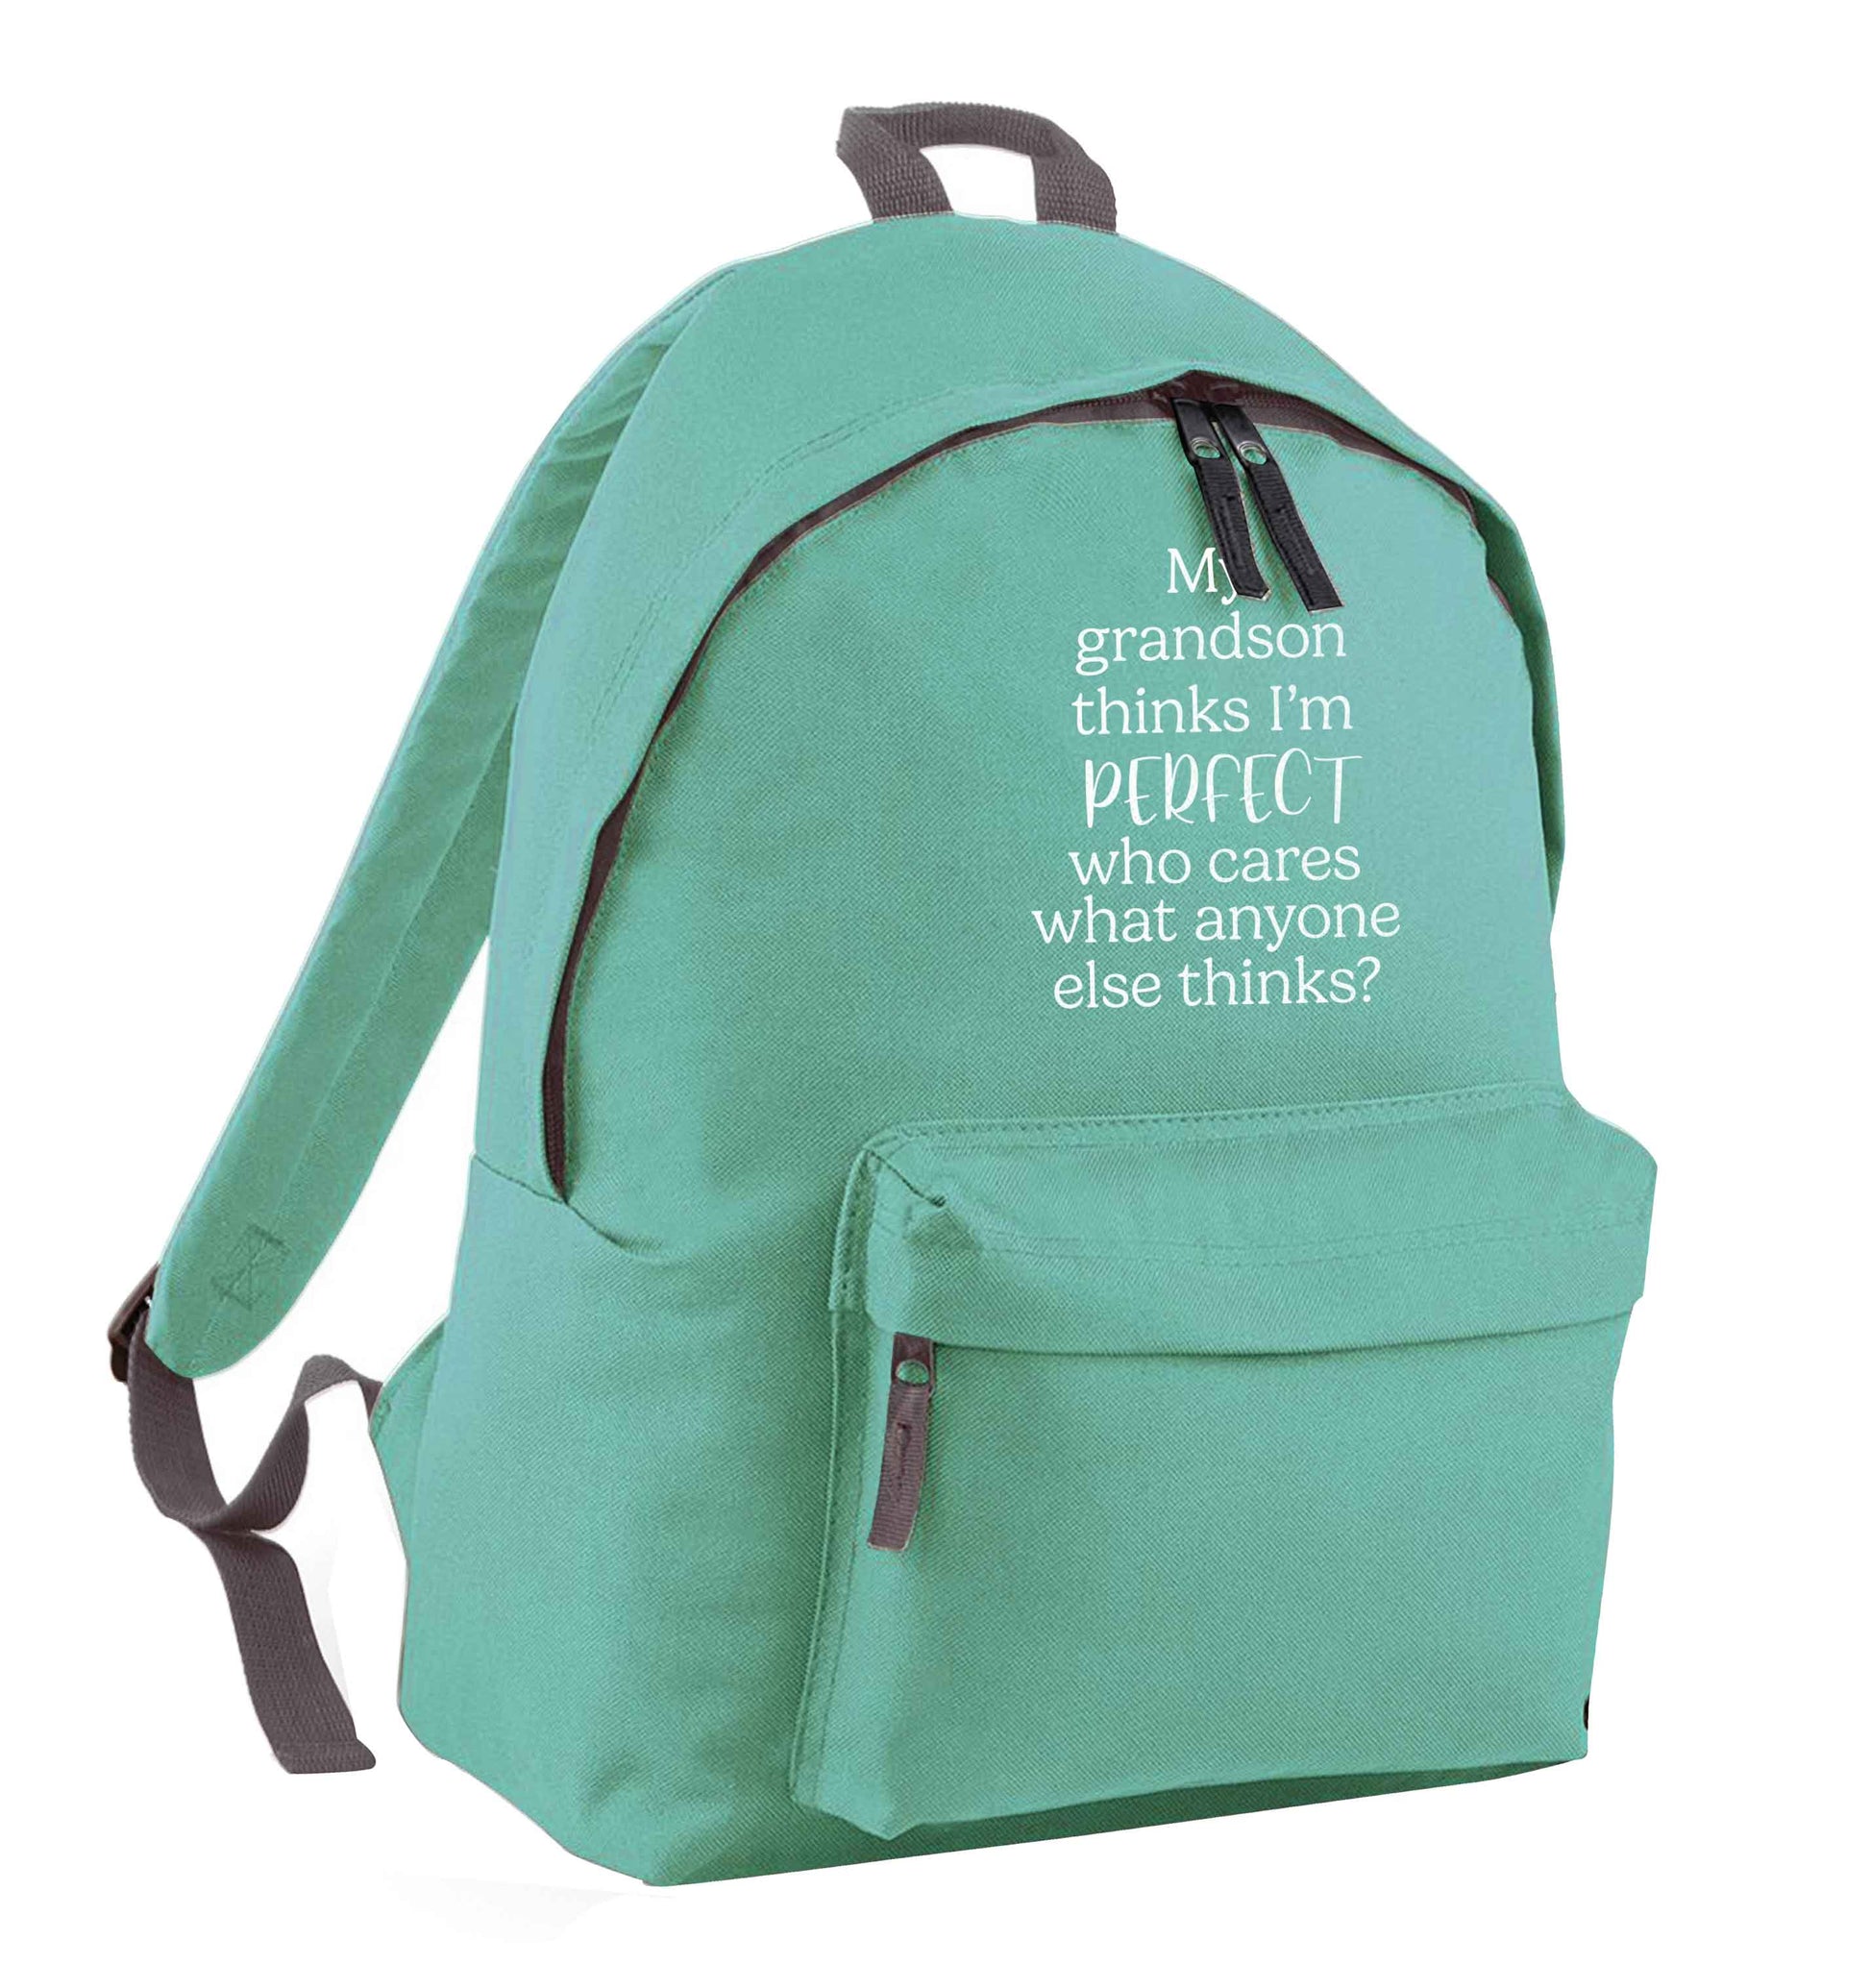 My Grandson thinks I'm perfect who cares what anyone else thinks? mint adults backpack